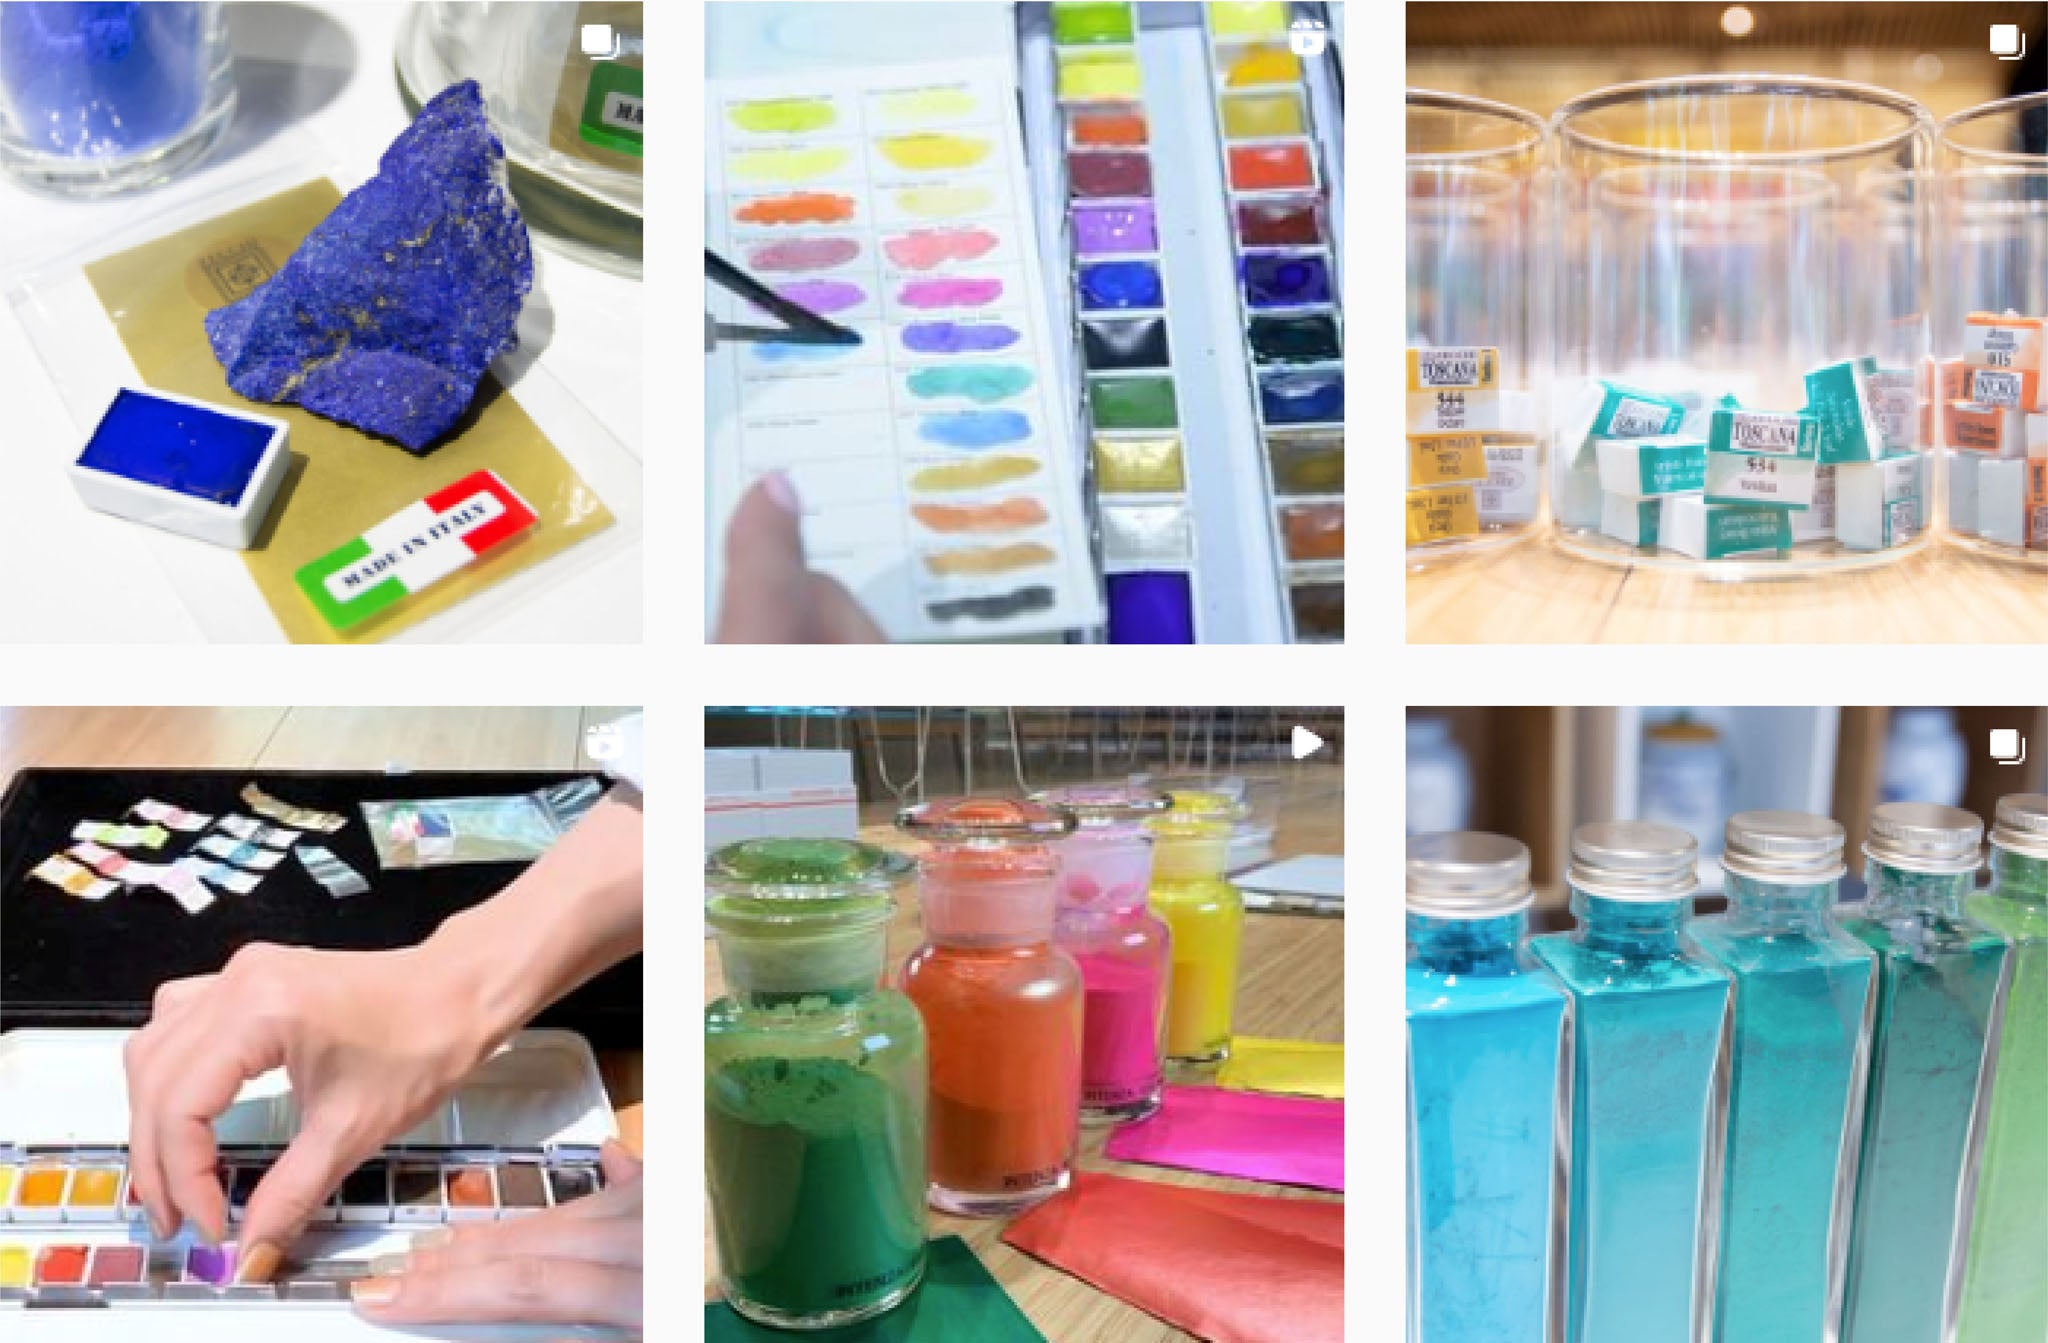 Instagram page for Pigment, an art materials lab in Tokyo, Japan